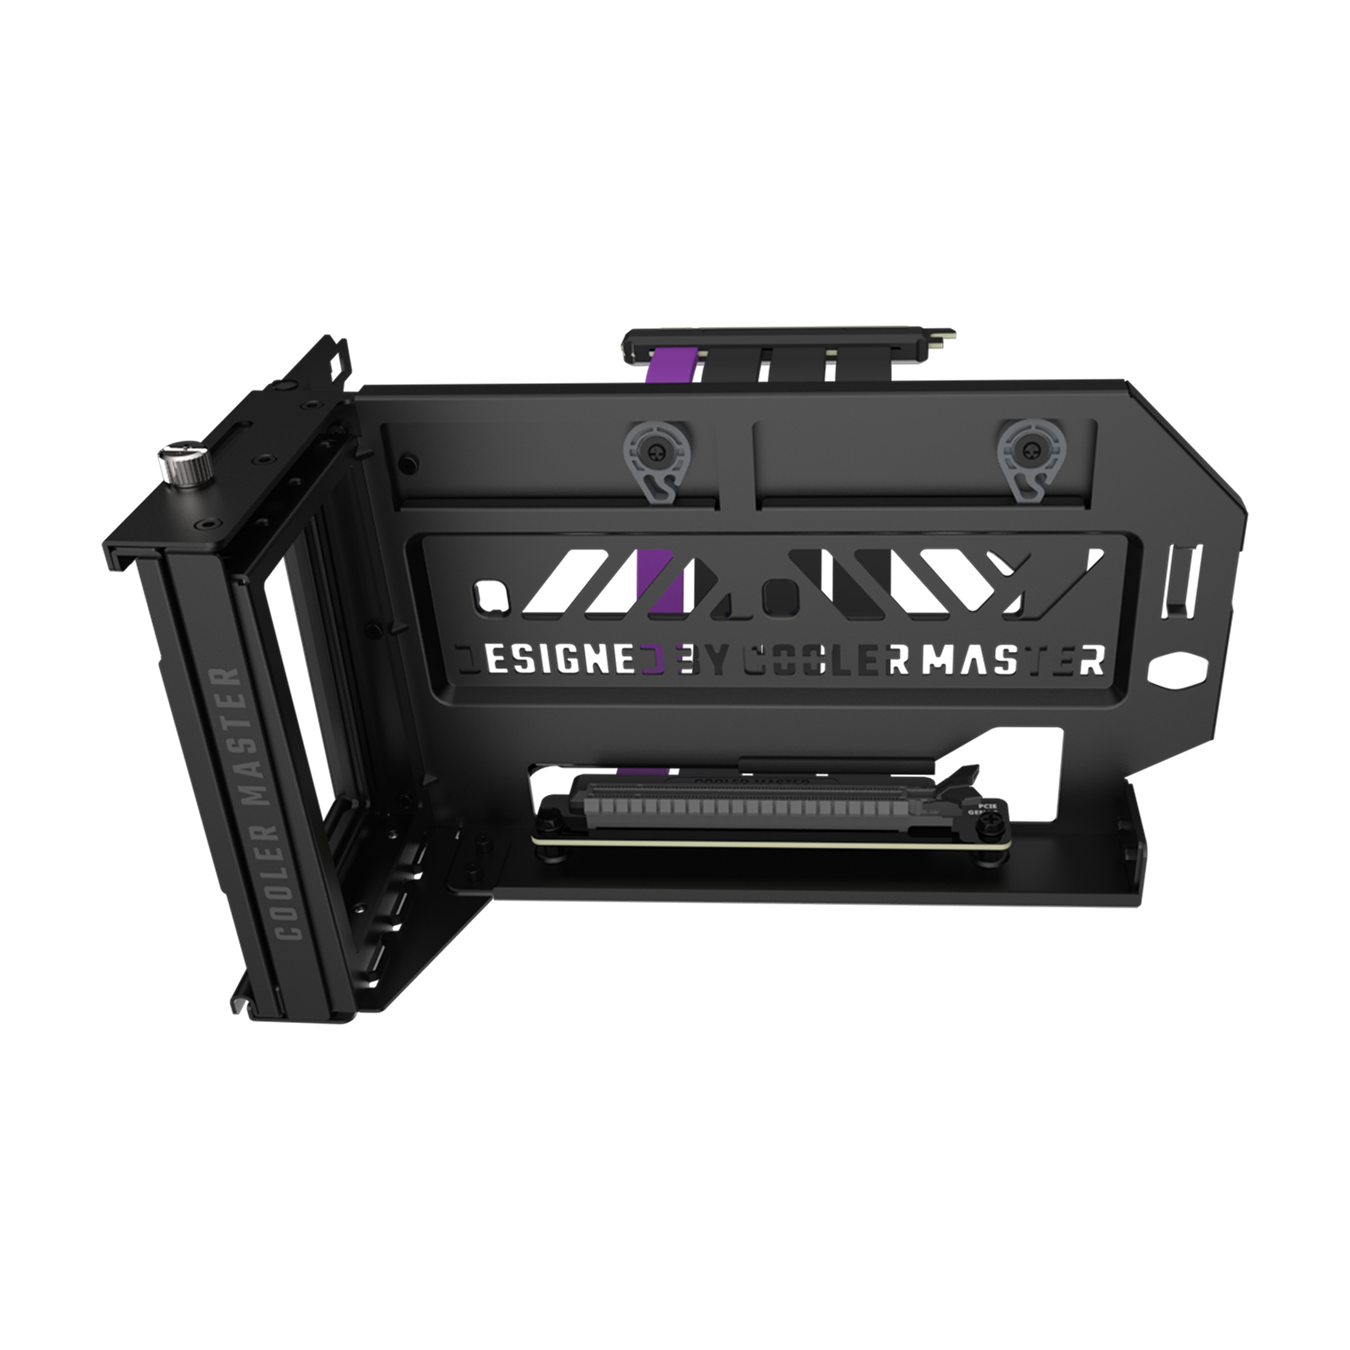 Vertical Graphics Card Holder Kit V3 - Give your chassis an instant makeover with Cooler Master’s Vertical Graphics Card Holder Kit V3!